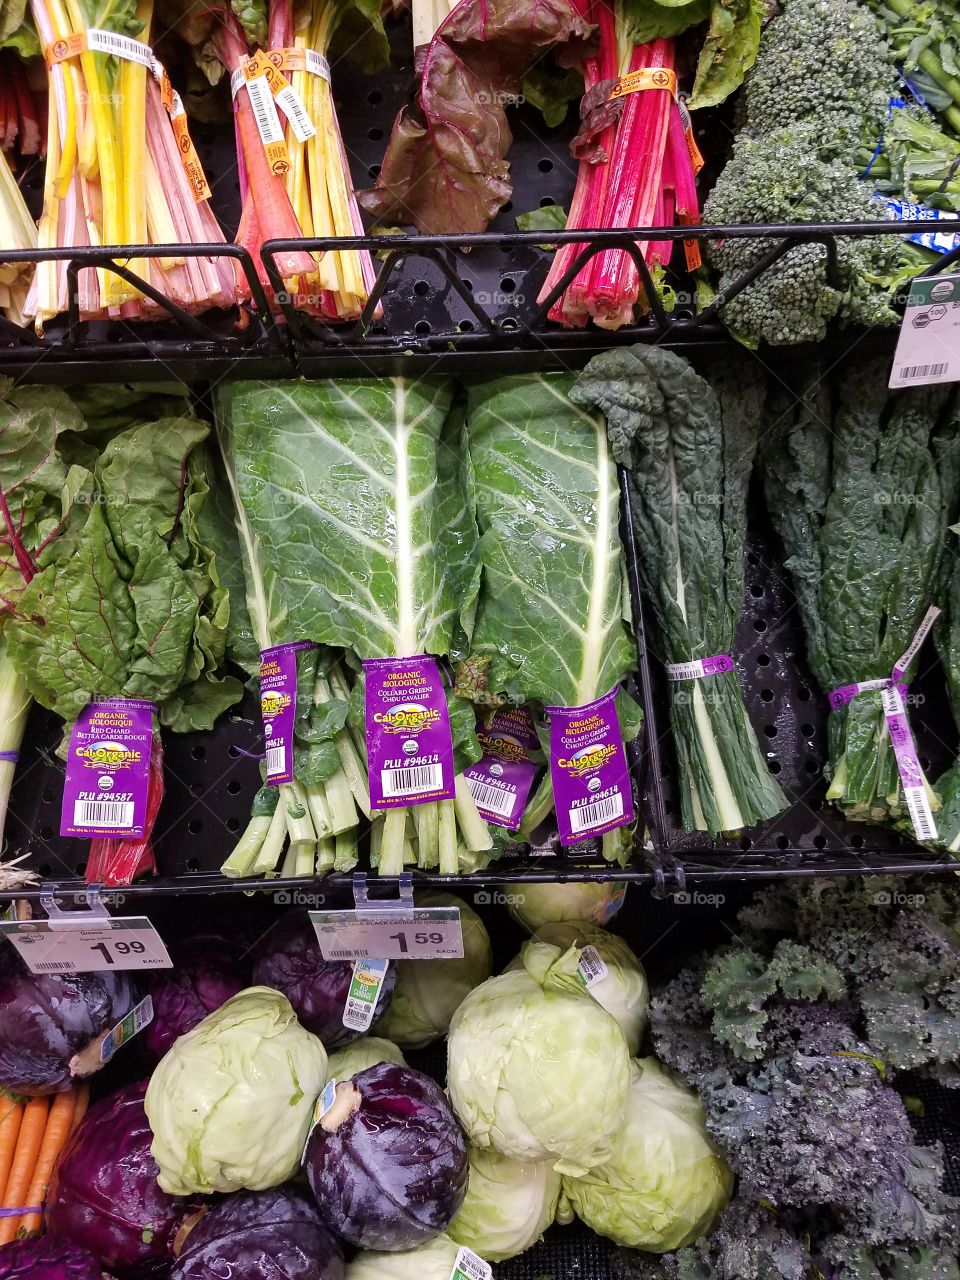 Kale at the store